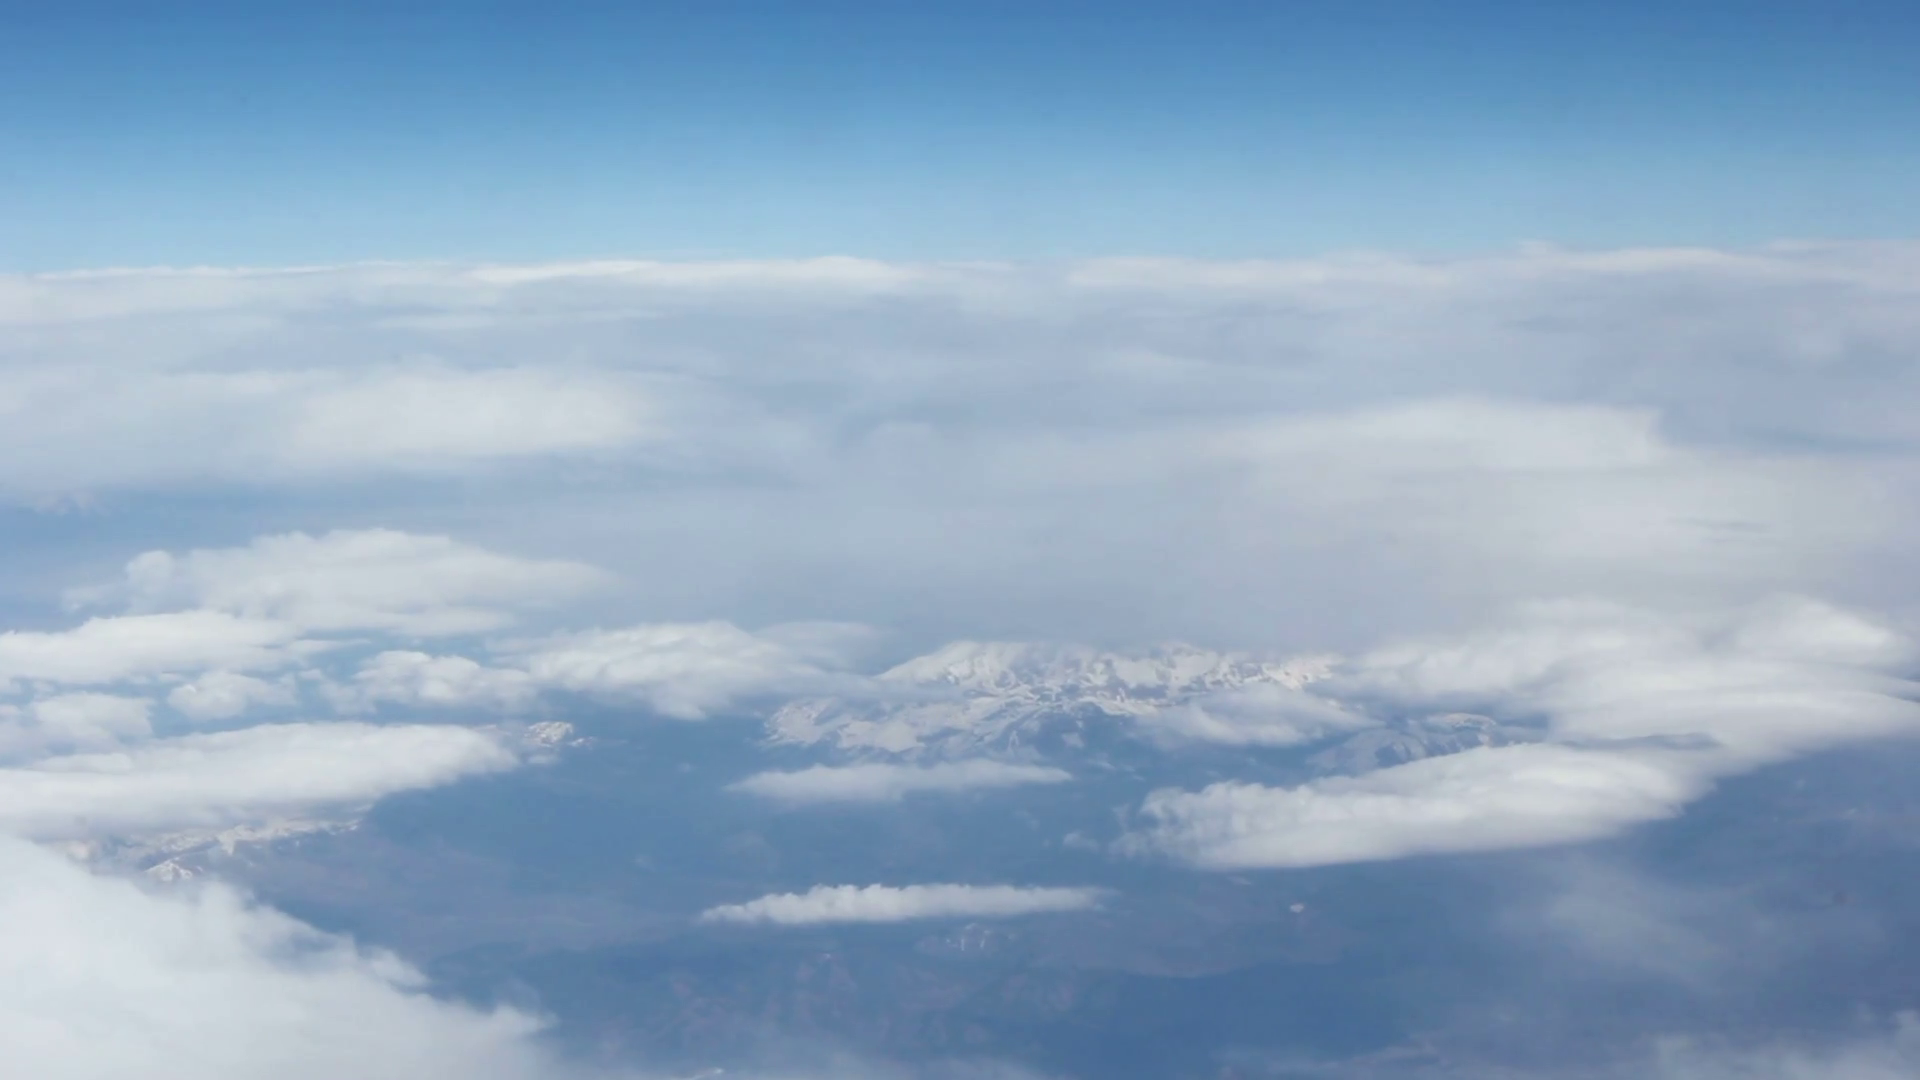 View from the clouds to the snow-capped mountains. Shooting from ...